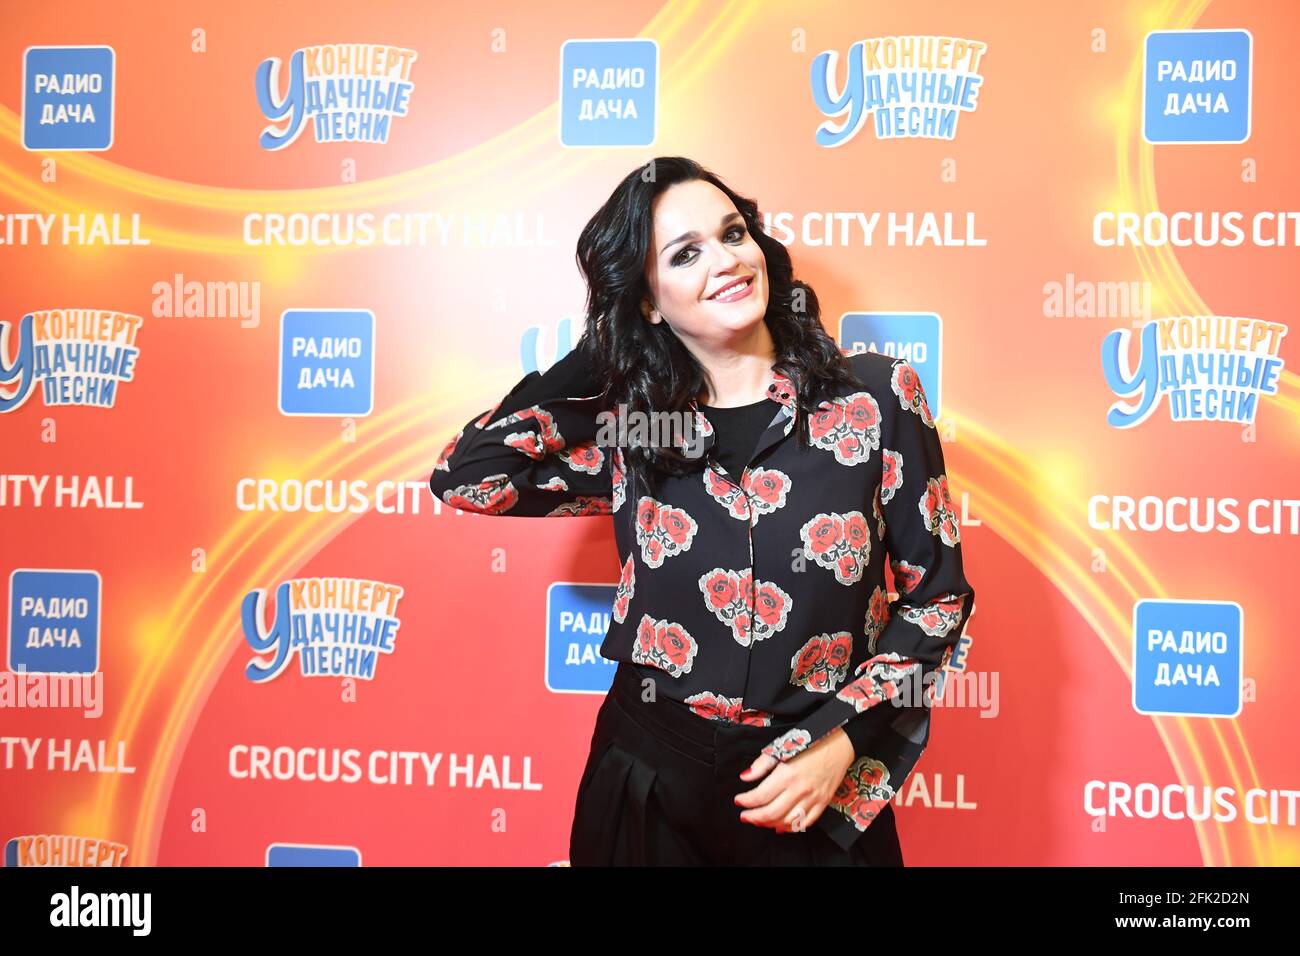 April 23, 2021. - Russia, Moscow Region. - Radio Dacha presents Lucky Songs  music show at Crocus City Hall. In picture: singer Slava Stock Photo - Alamy